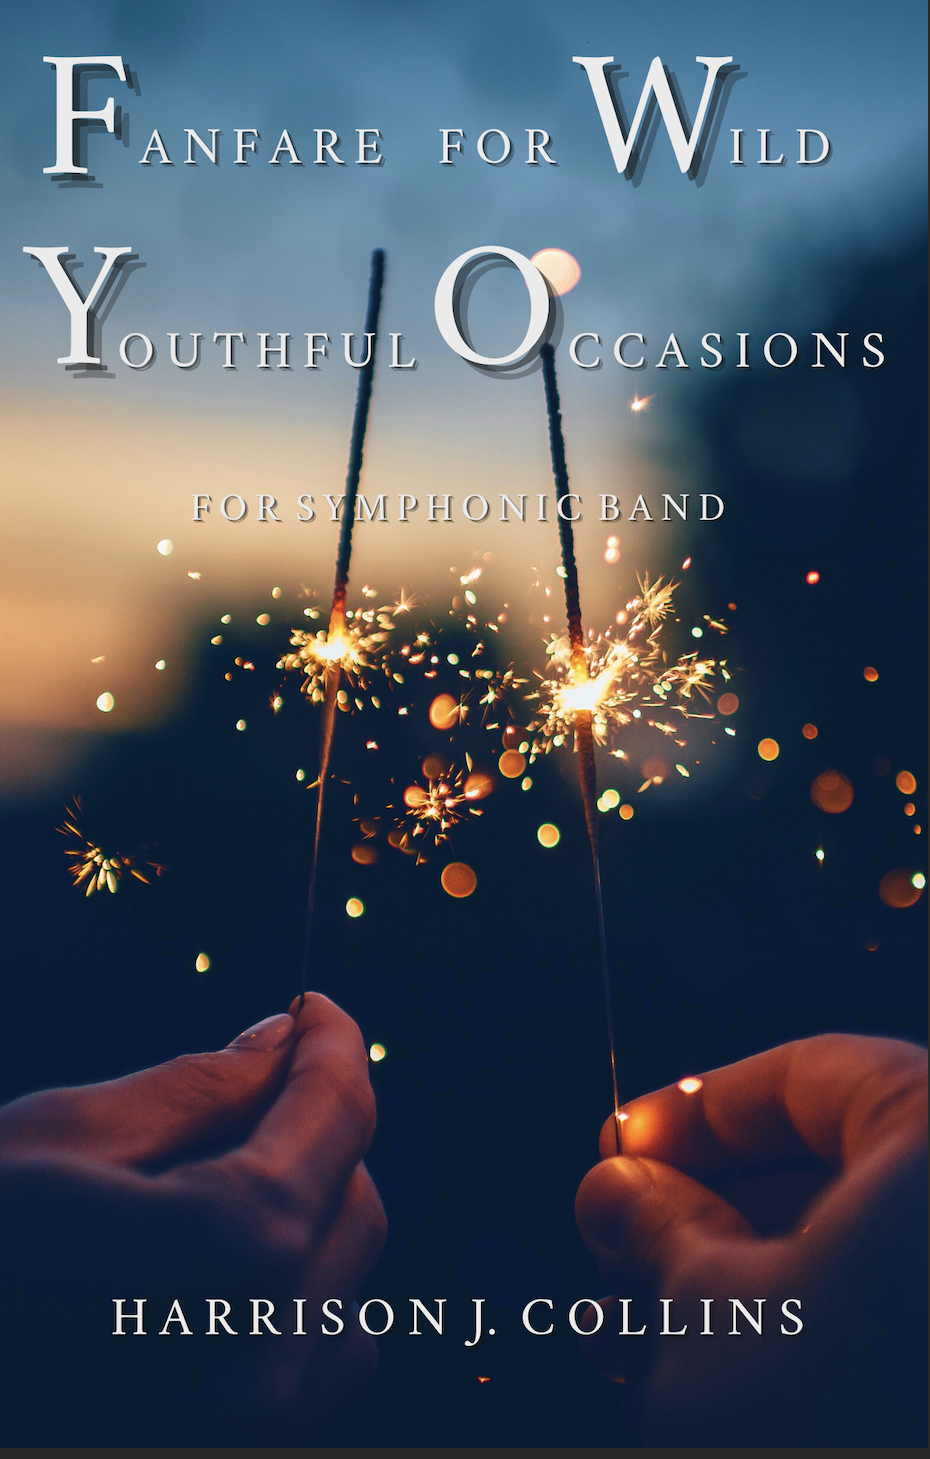 Fanfare For Wild Youthful Occasions by Harrison Collins